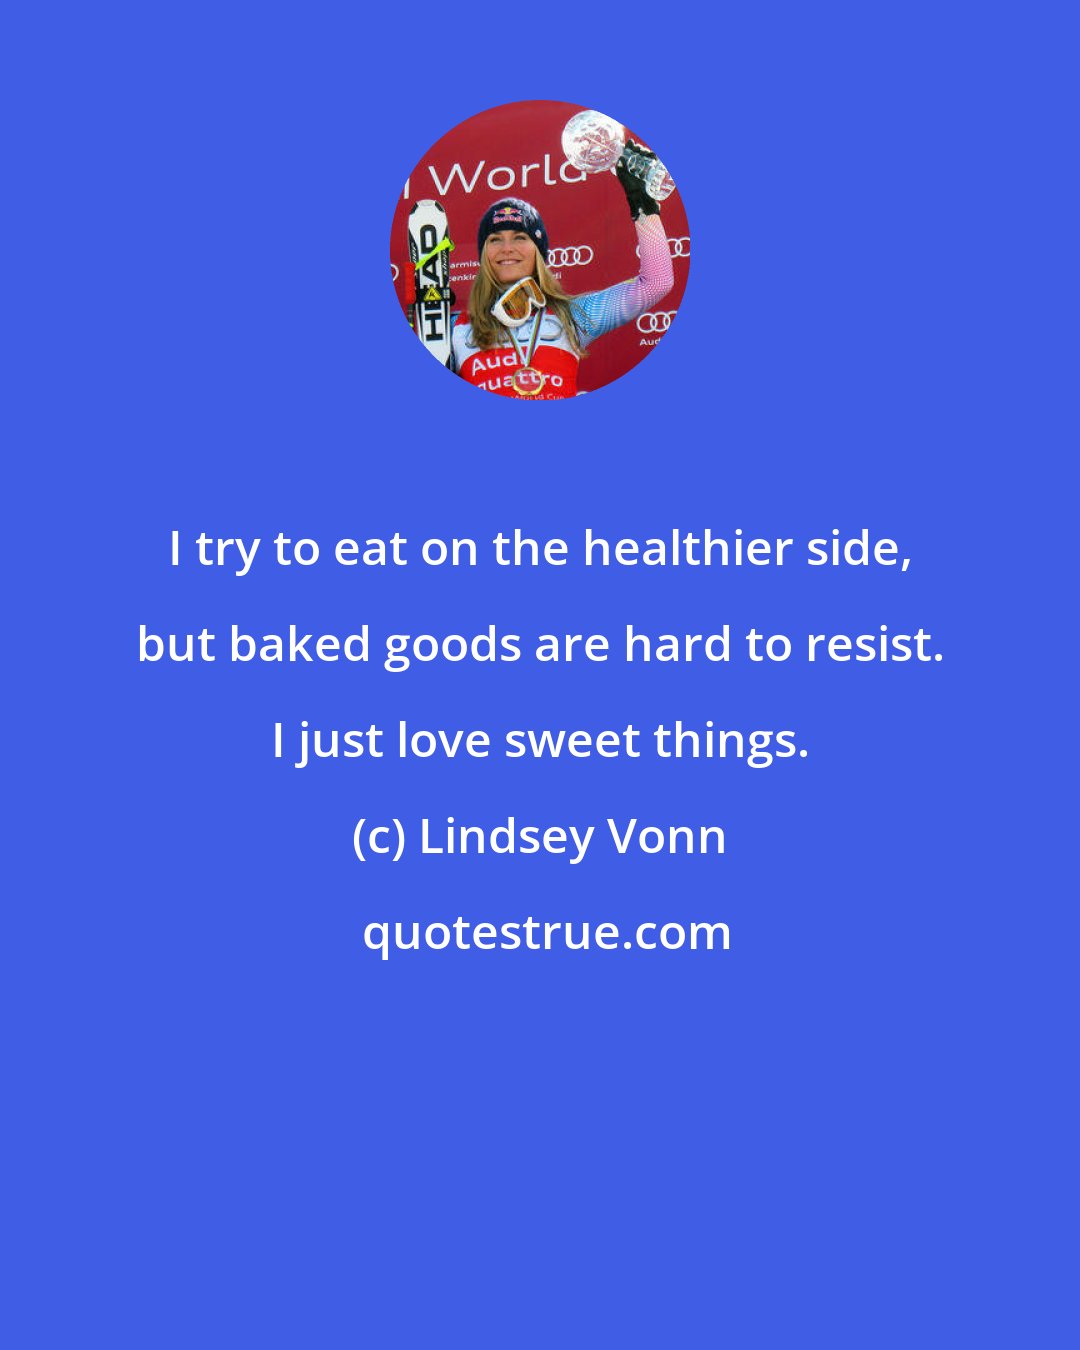 Lindsey Vonn: I try to eat on the healthier side, but baked goods are hard to resist. I just love sweet things.